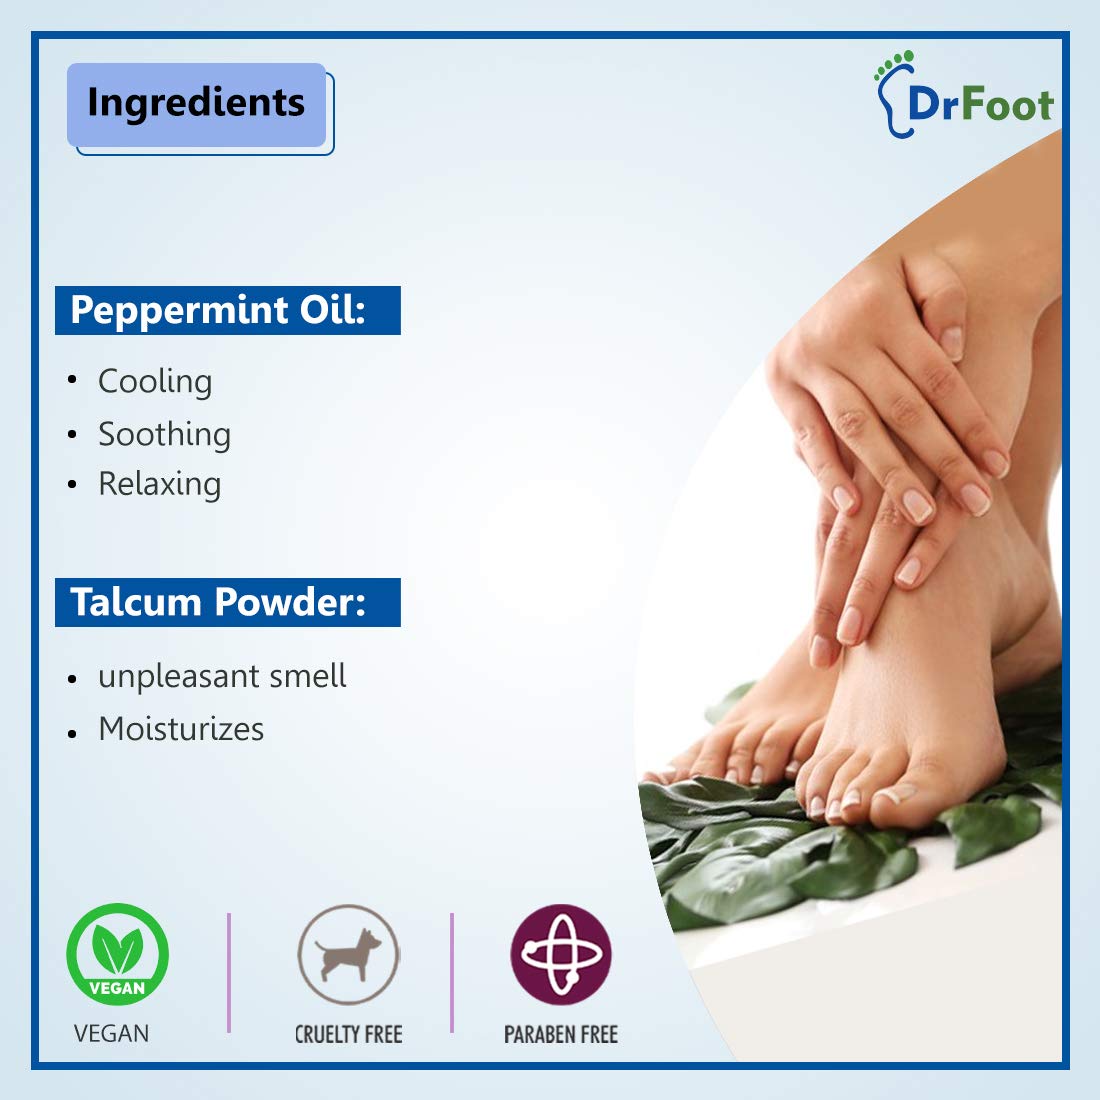 Dr Foot Odor Fighting Foot Powder Eliminates Foot Odor Instantly, Keeps Feet Shoes Fresh & Dry – 100gm